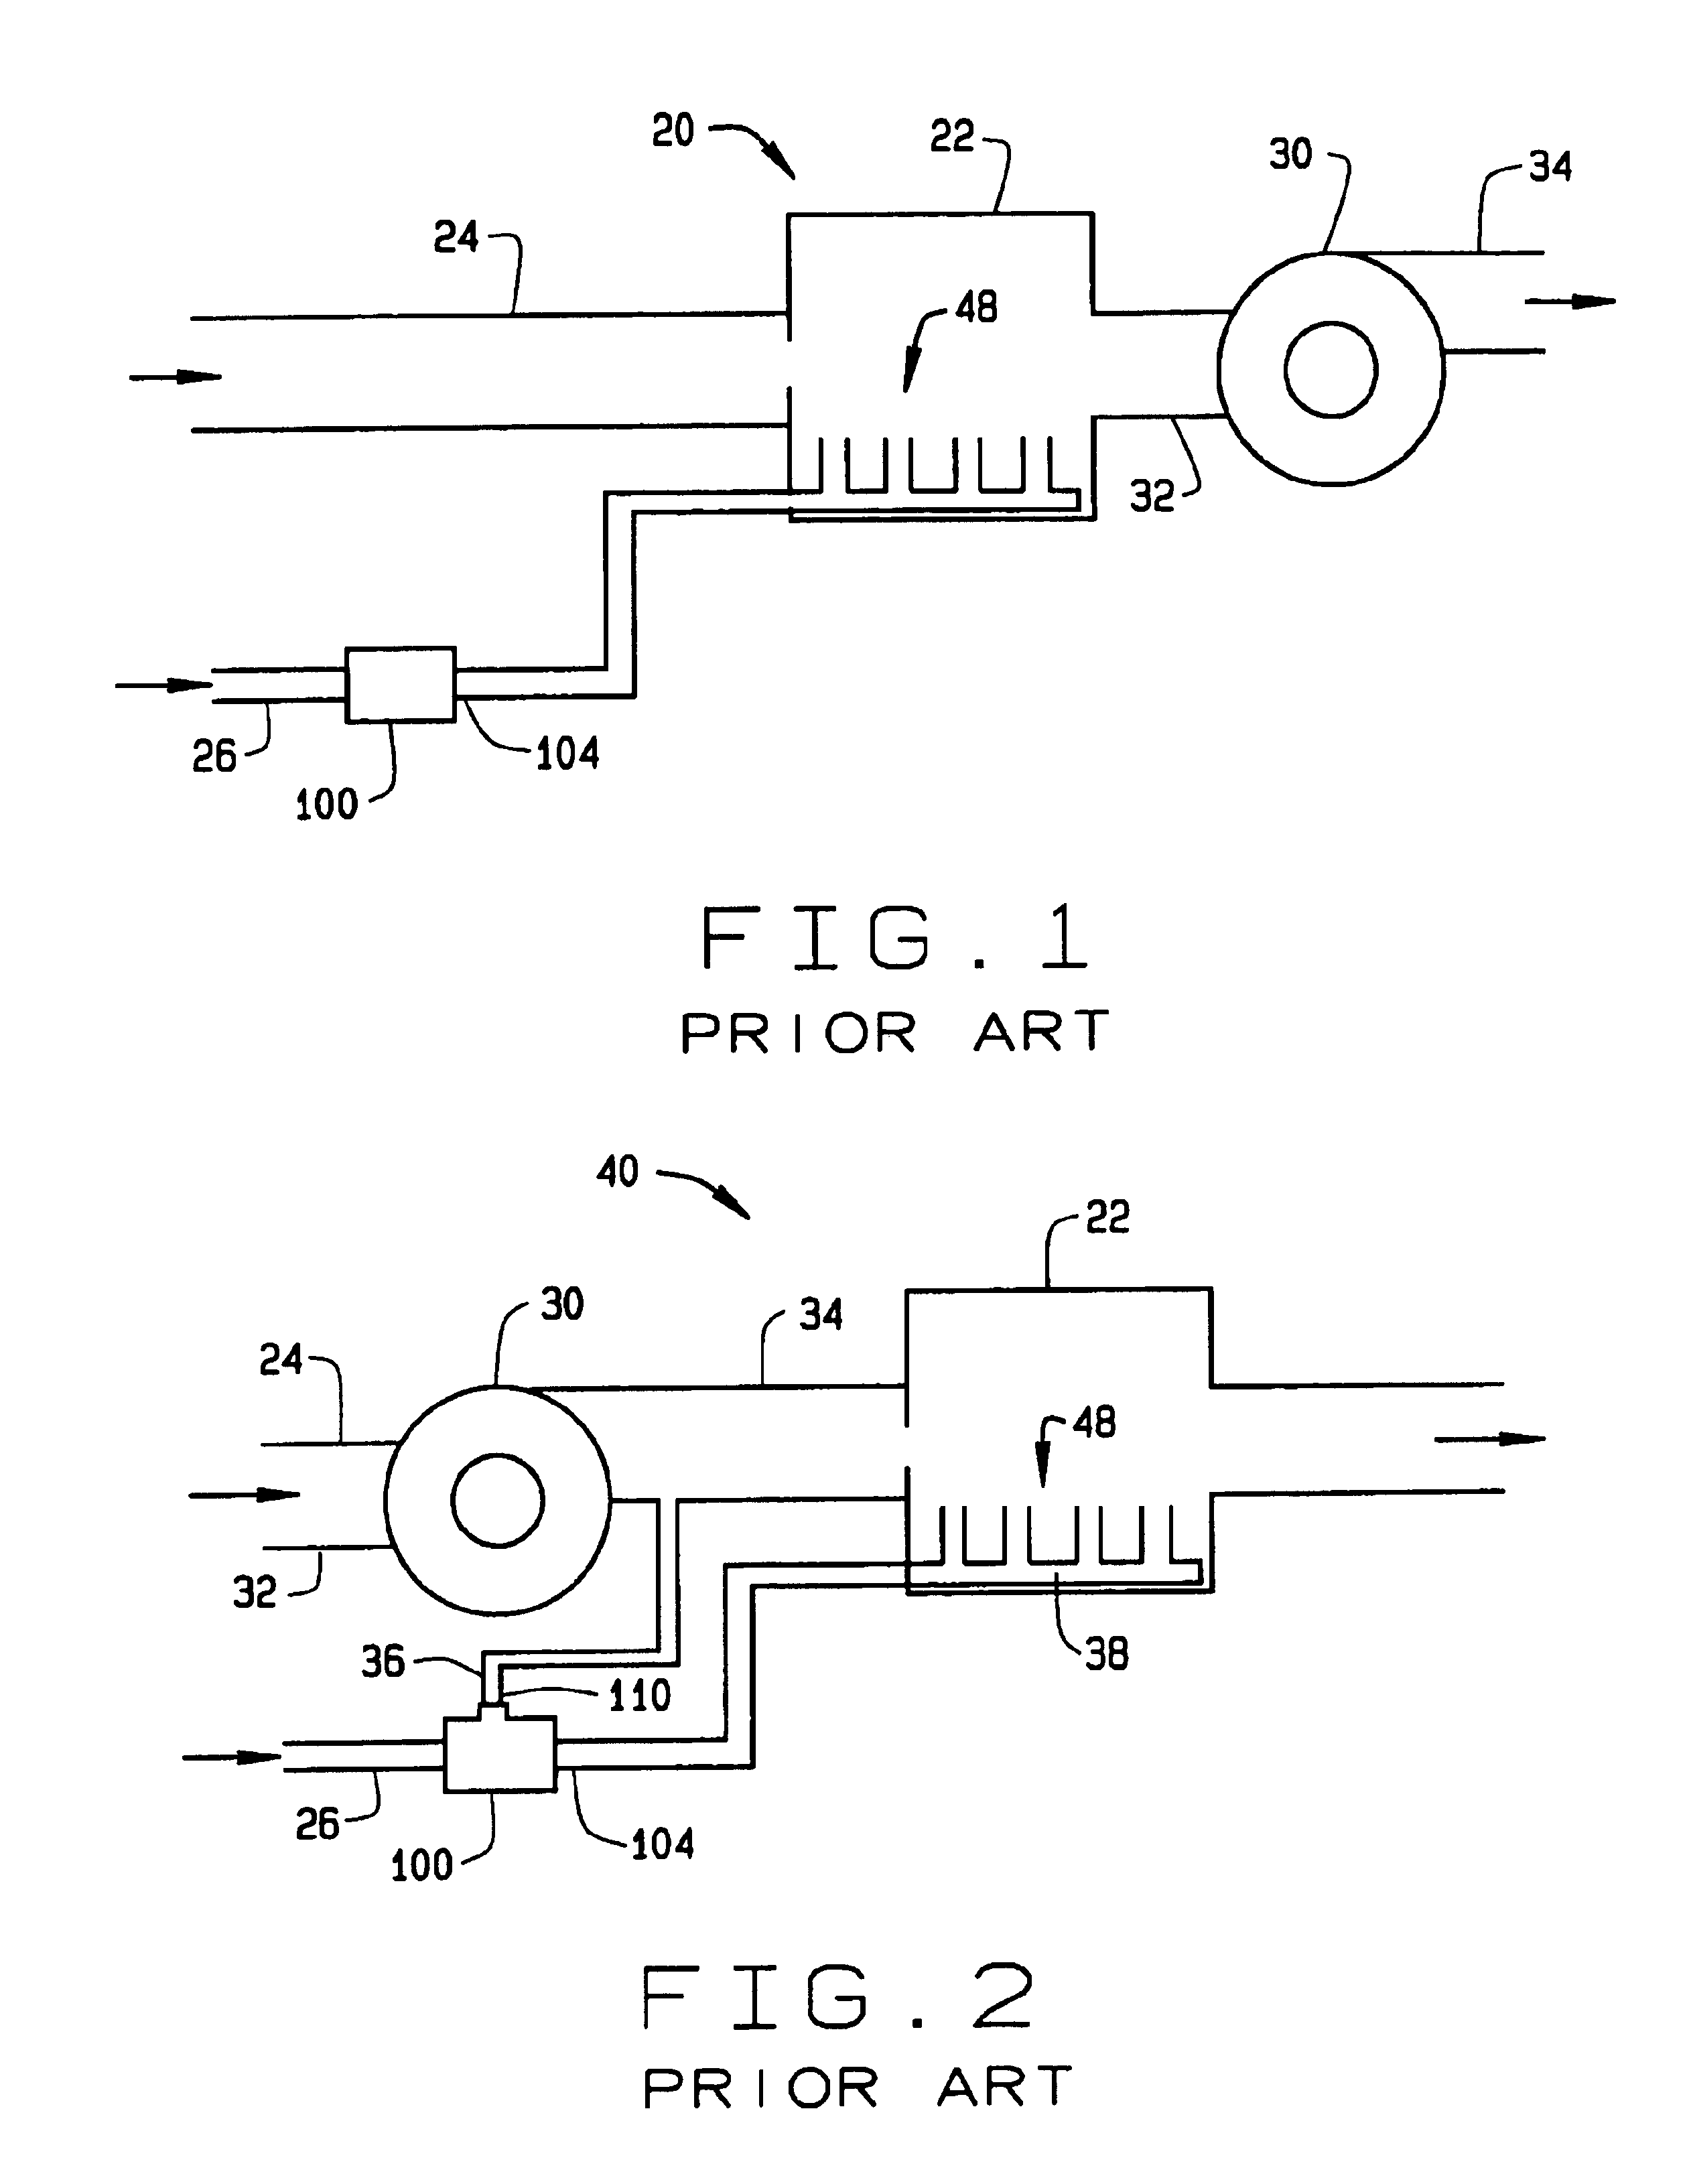 System and methods for modulating gas input to a gas burner